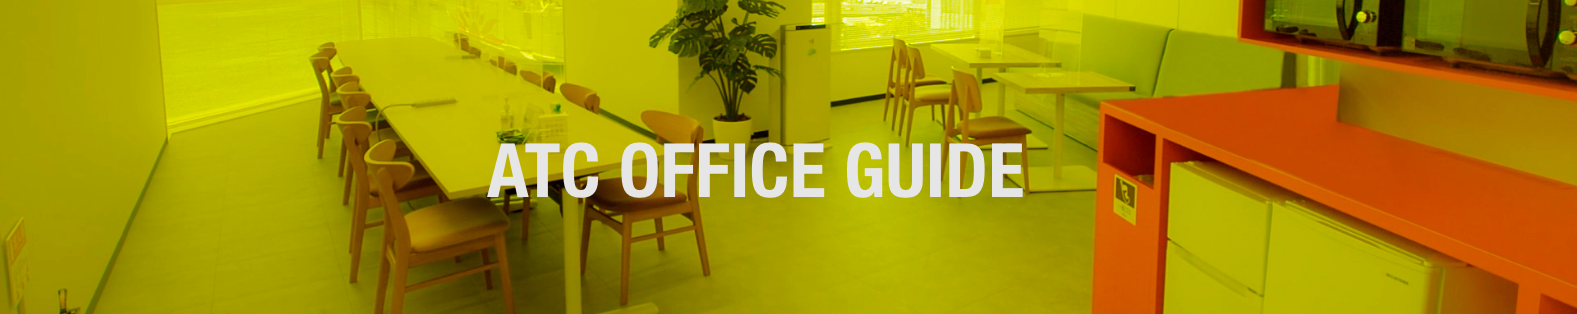 ATC OFFICE GUIDE